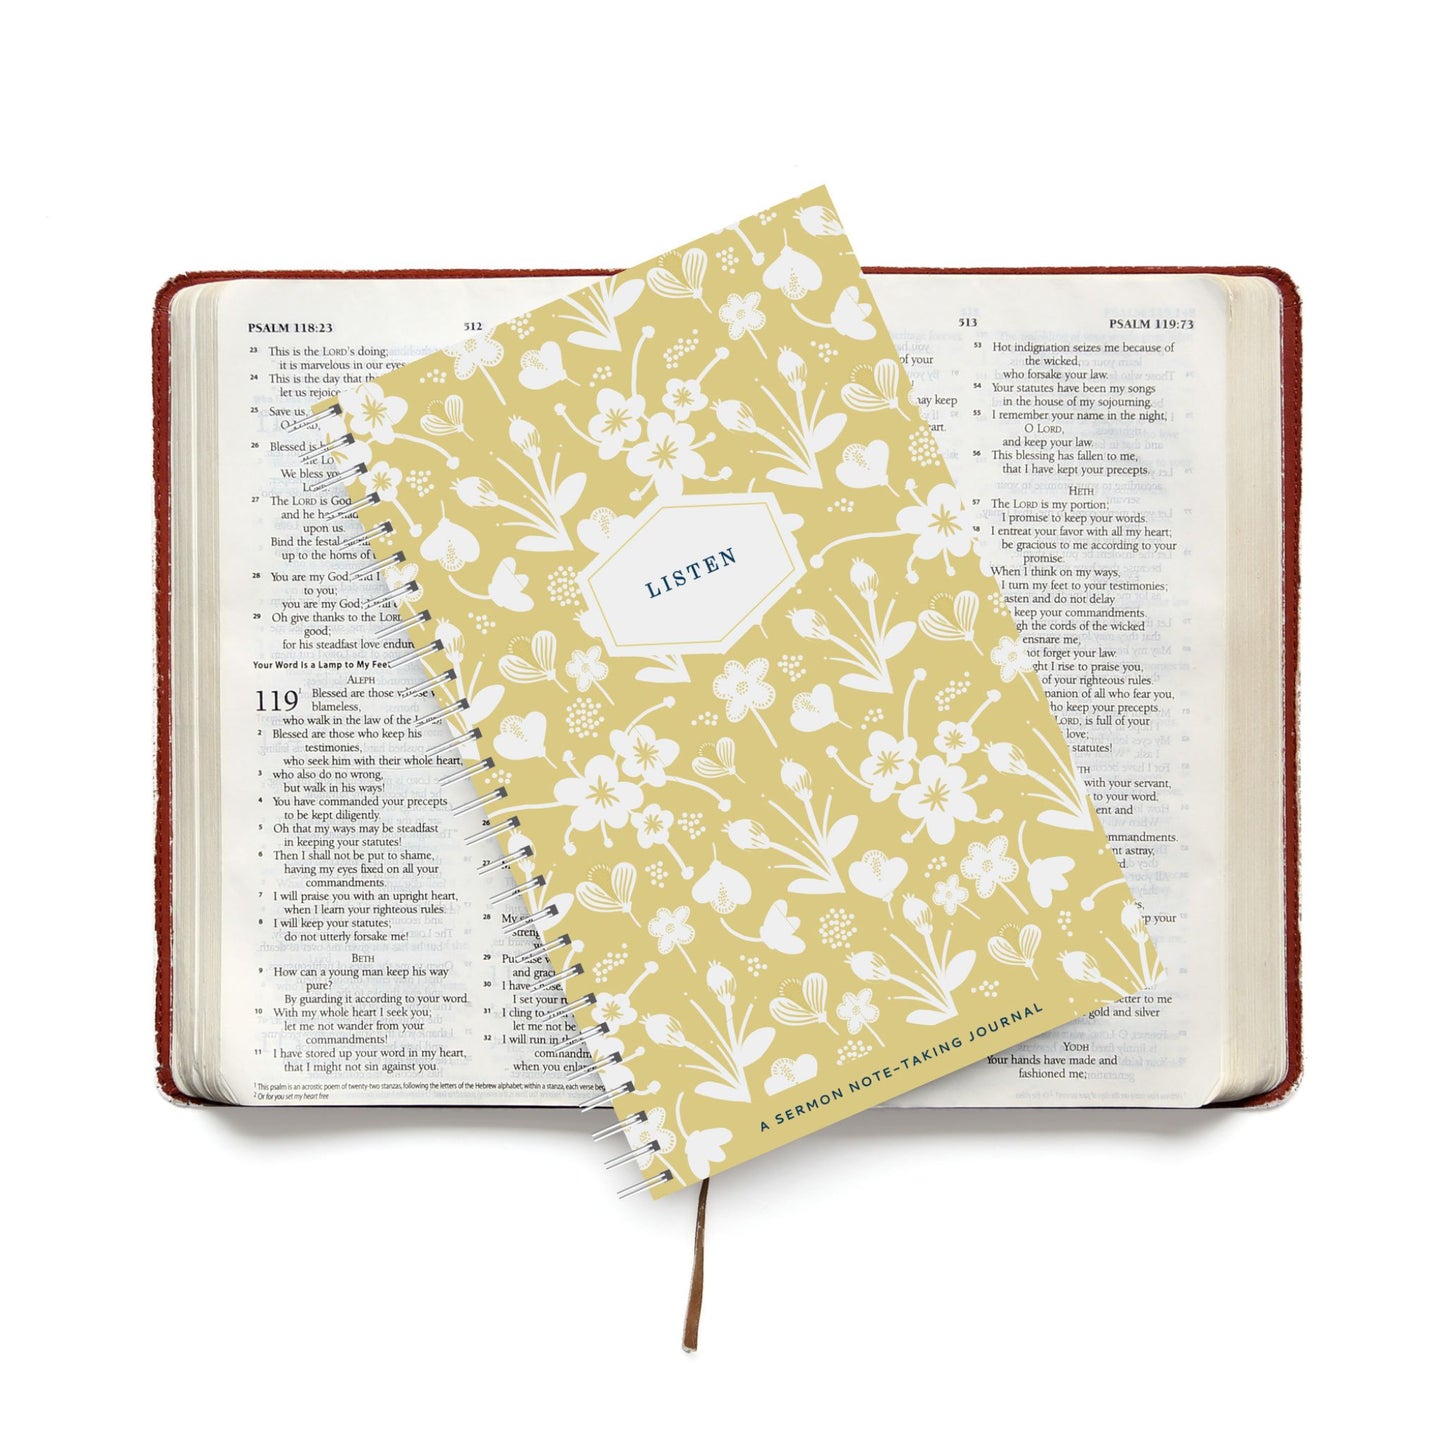 A beautiful journal designed for taking notes during sermons and reflection.